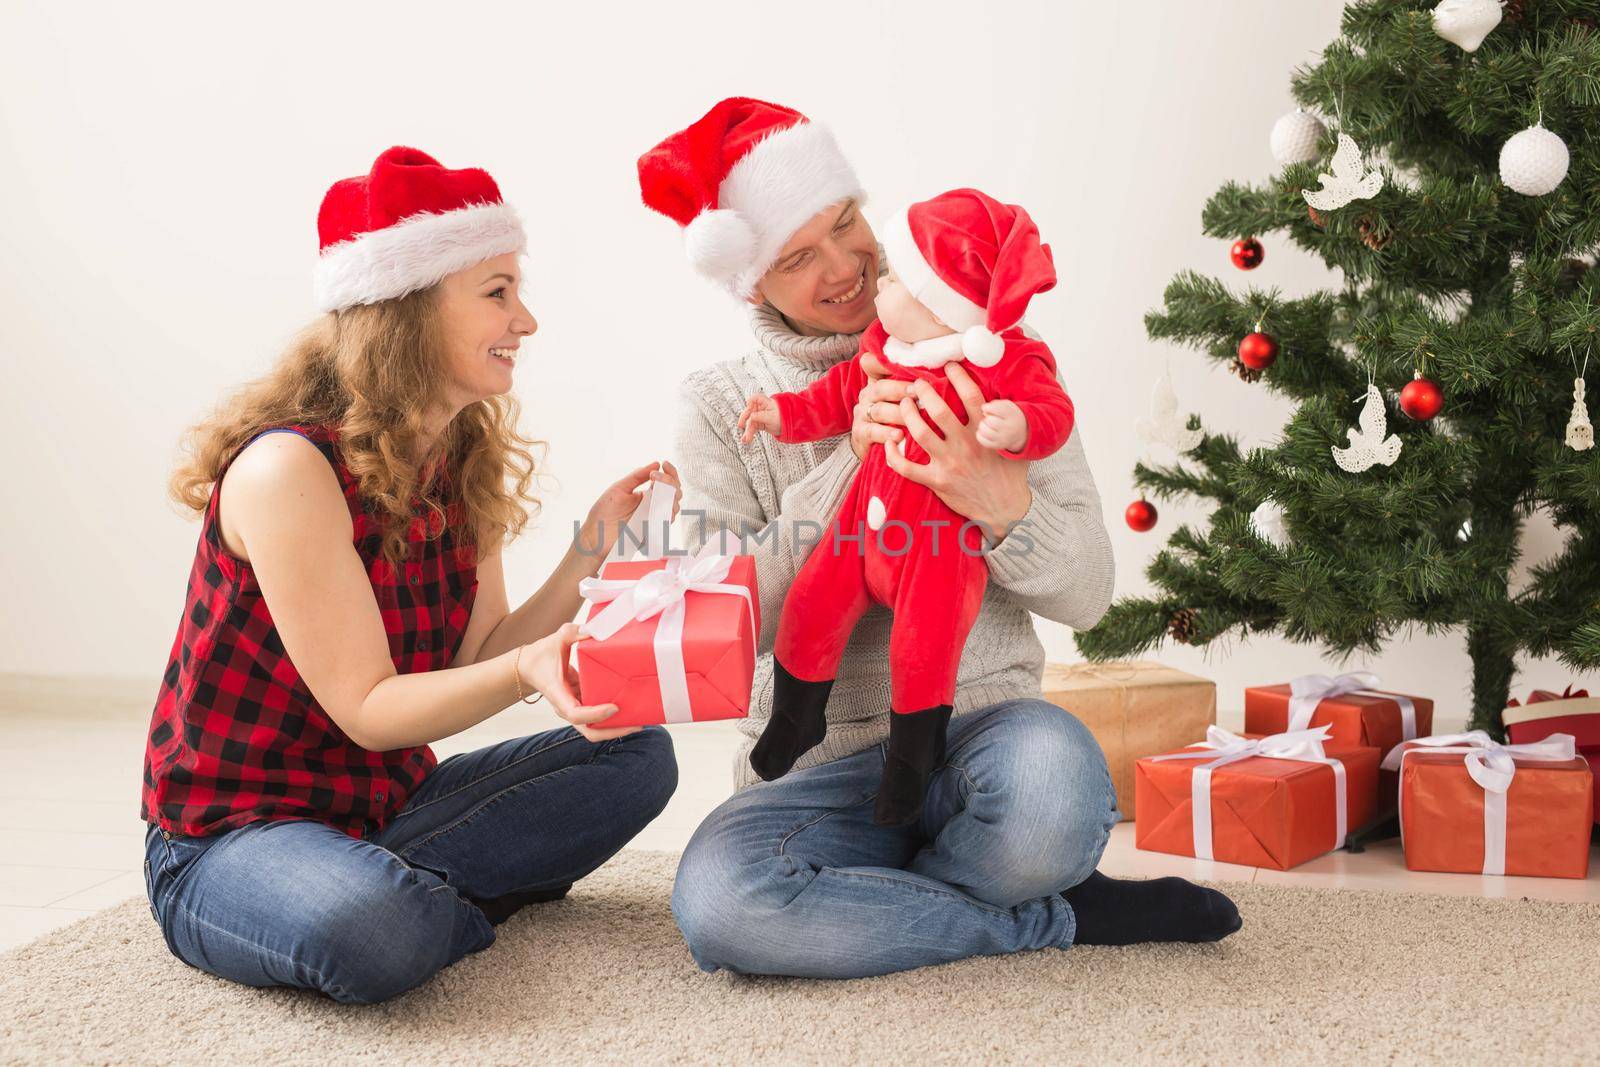 Happy couple with baby celebrating Christmas together at home. by Satura86